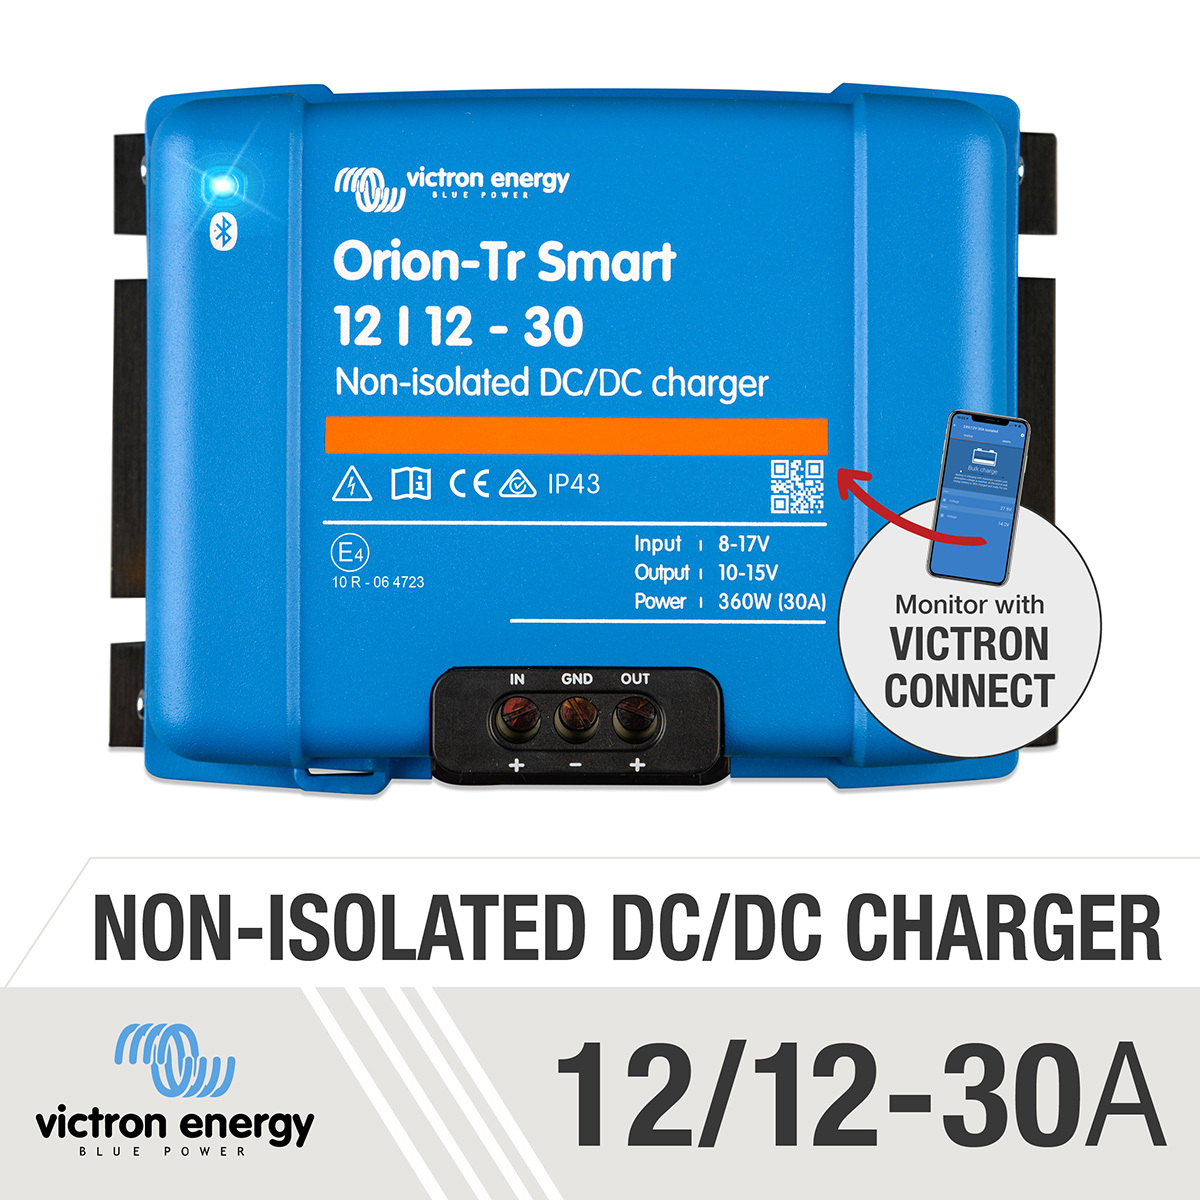 Victron Orion-Tr Smart 12/12-30A (360W) Non-isolated DC-DC with FREE  SHIPPING Australia Wide.